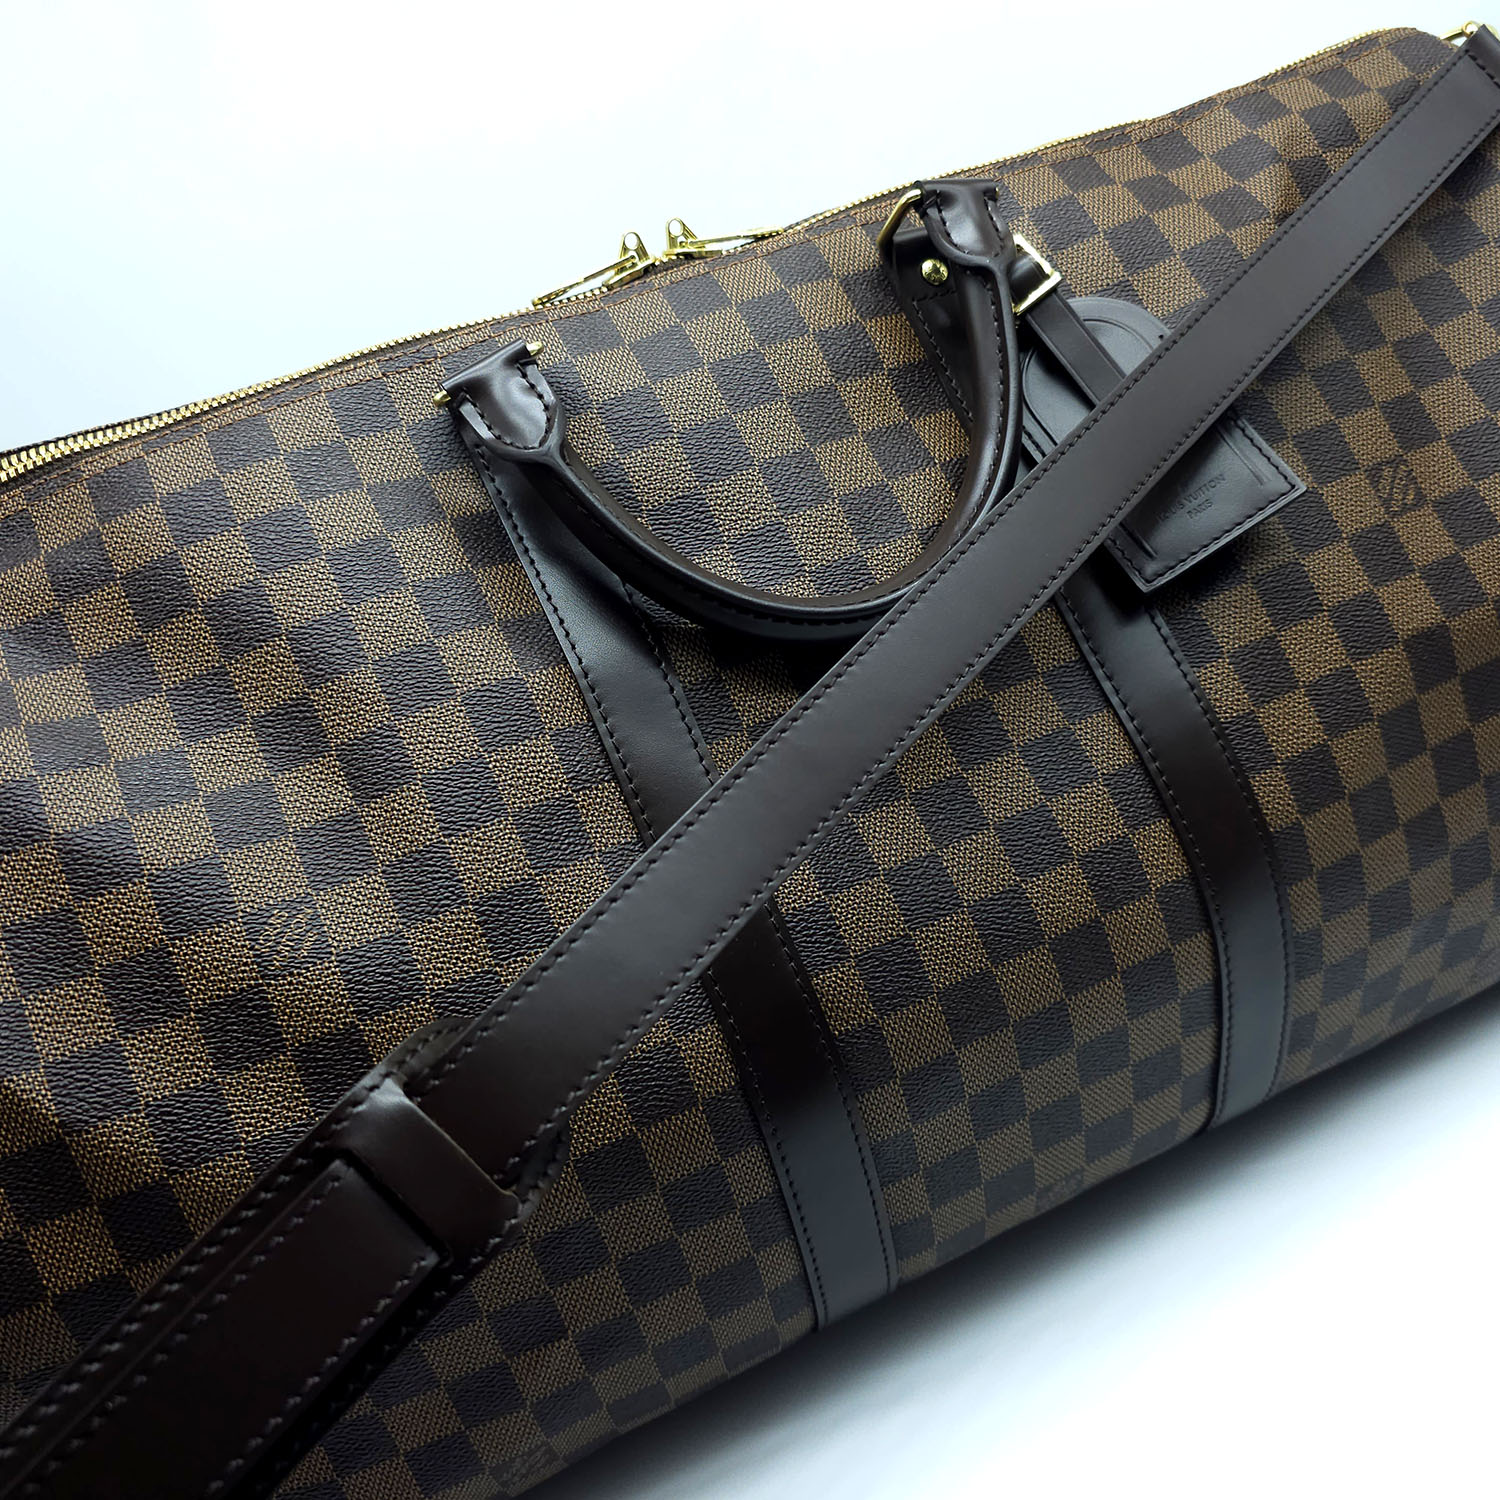 Louis Vuitton keepall bandouliere 55 damier ebene – Lady Clara's Collection